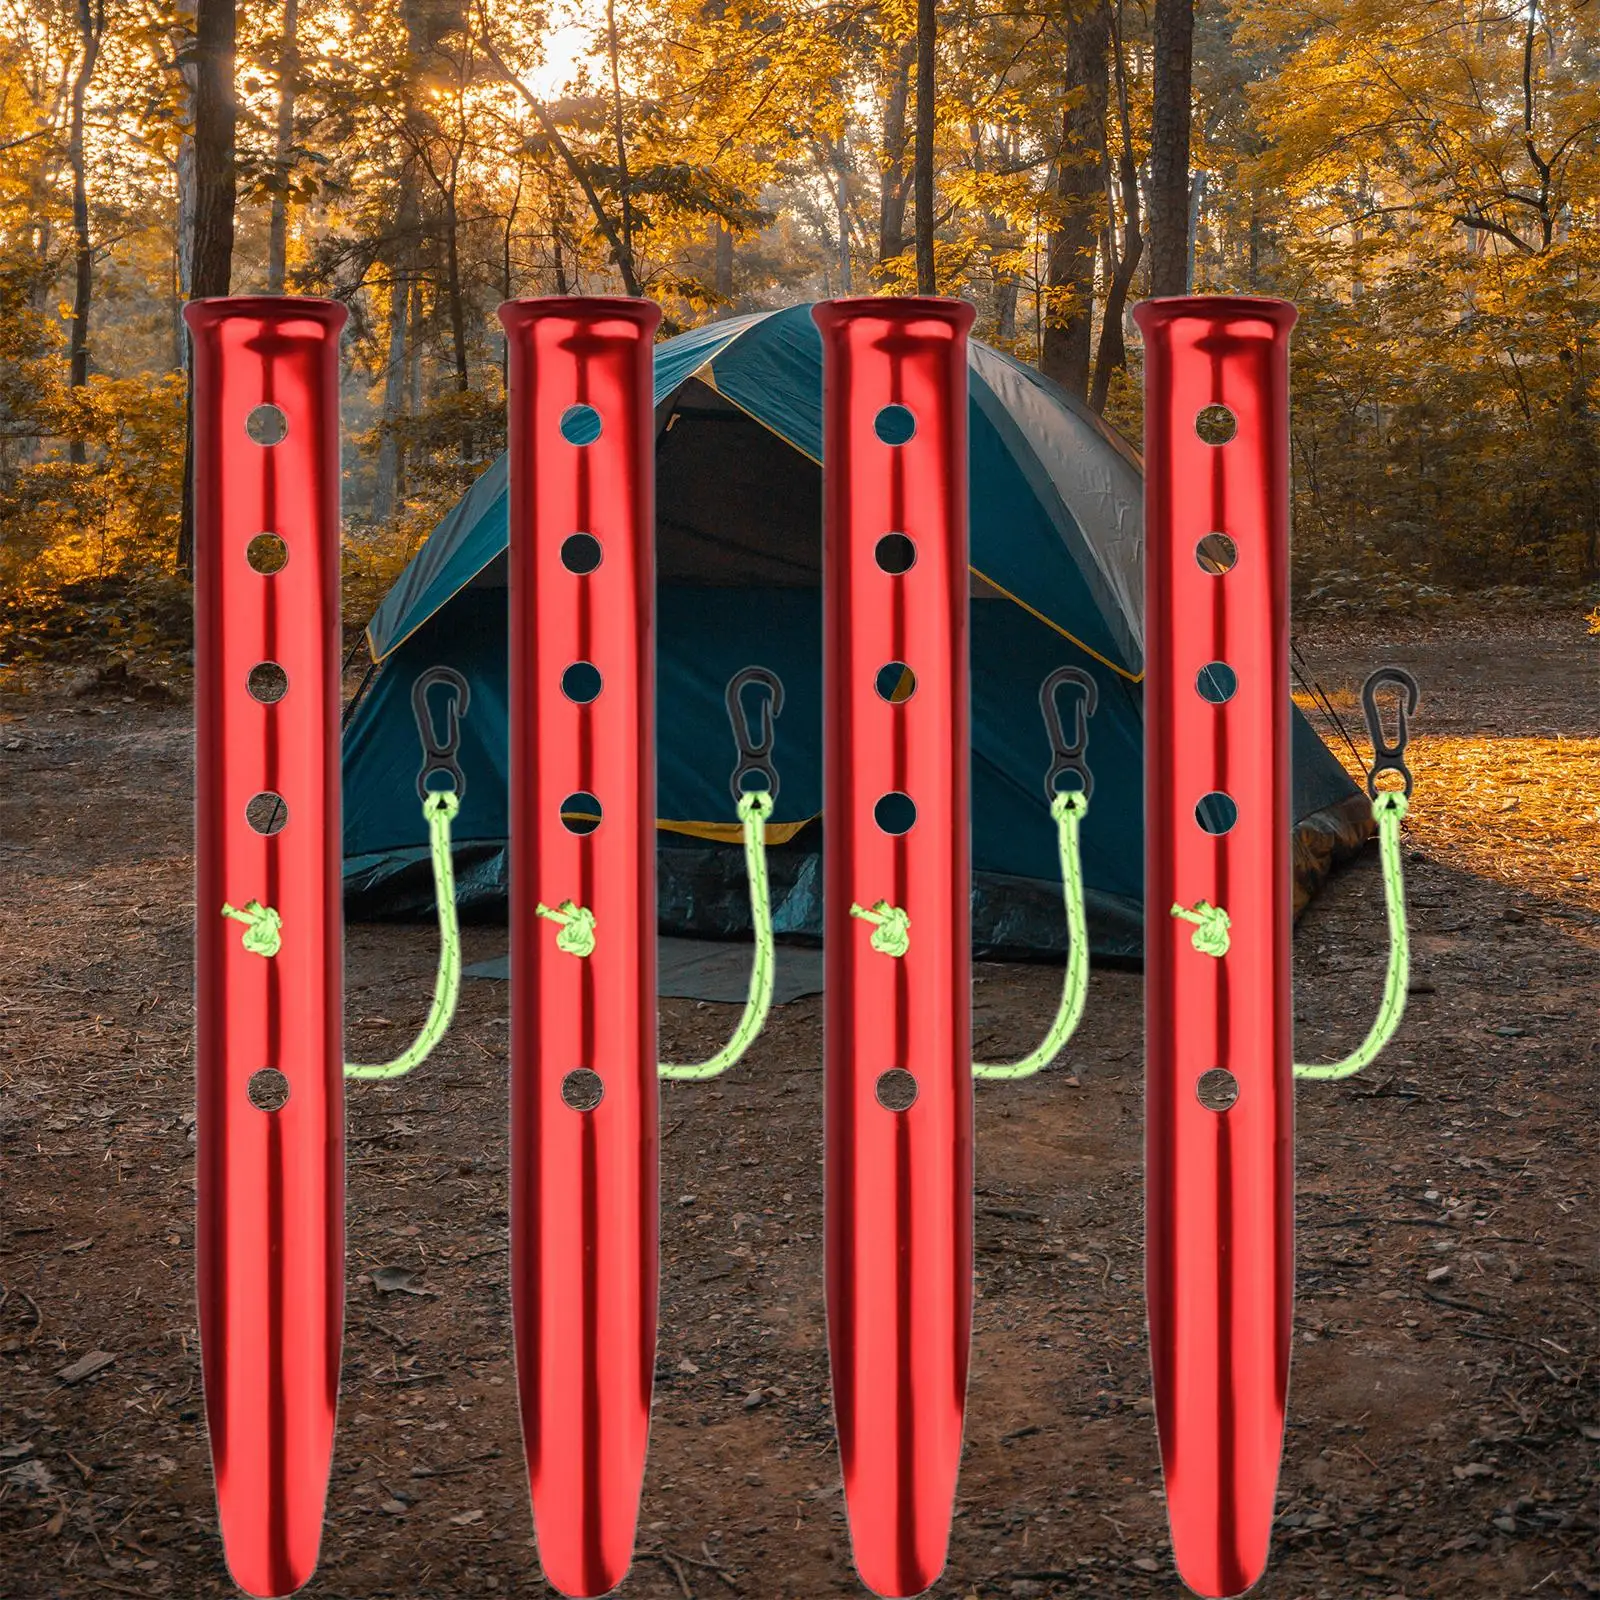 4x Metal Tent Pegs Snow Peg Ground Anchor Camping Loose Sand Camping Stakes for Canopy Hiking Backpacking Picnic Beach